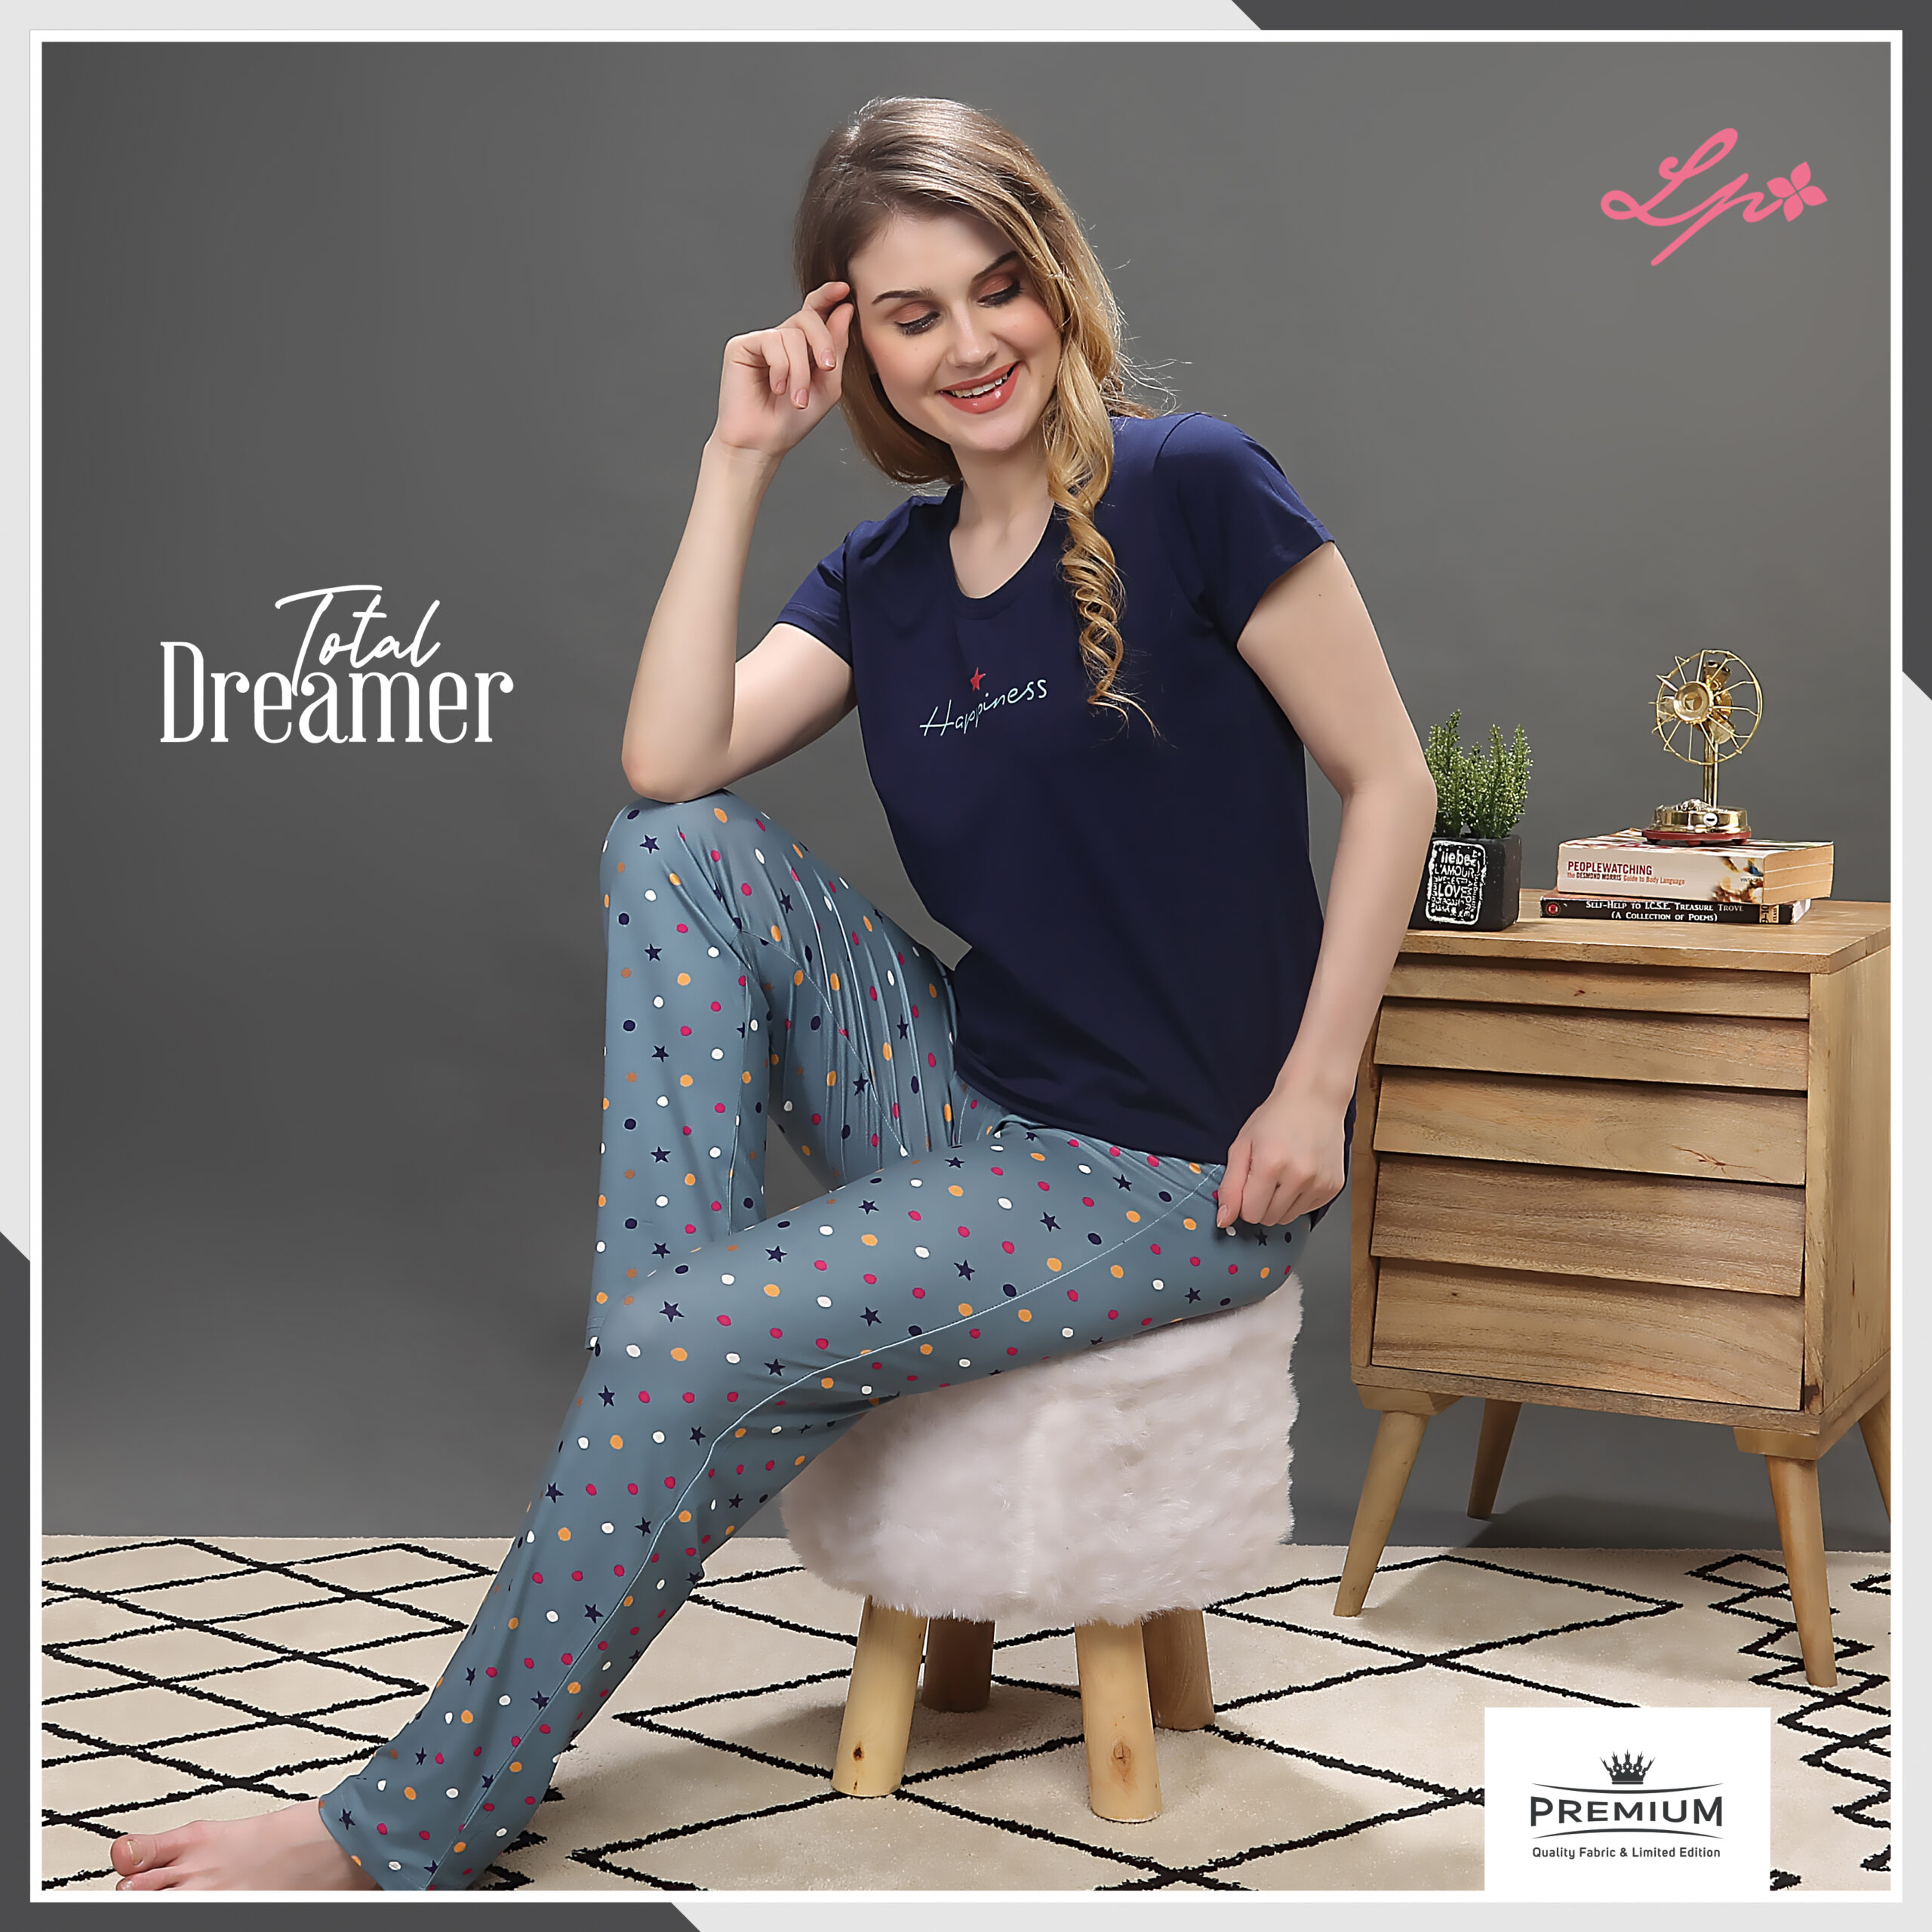 StoreRex - Sleep Dress Night Wear with Shirt & Trouser (Complete Sleeping  Suit) For Ladies (ND-1) PRICE Rs.1290 Detail Here:  https://shoprex.com/clothing/womens/night-dresses/ #nightsuit #nighty |  Facebook